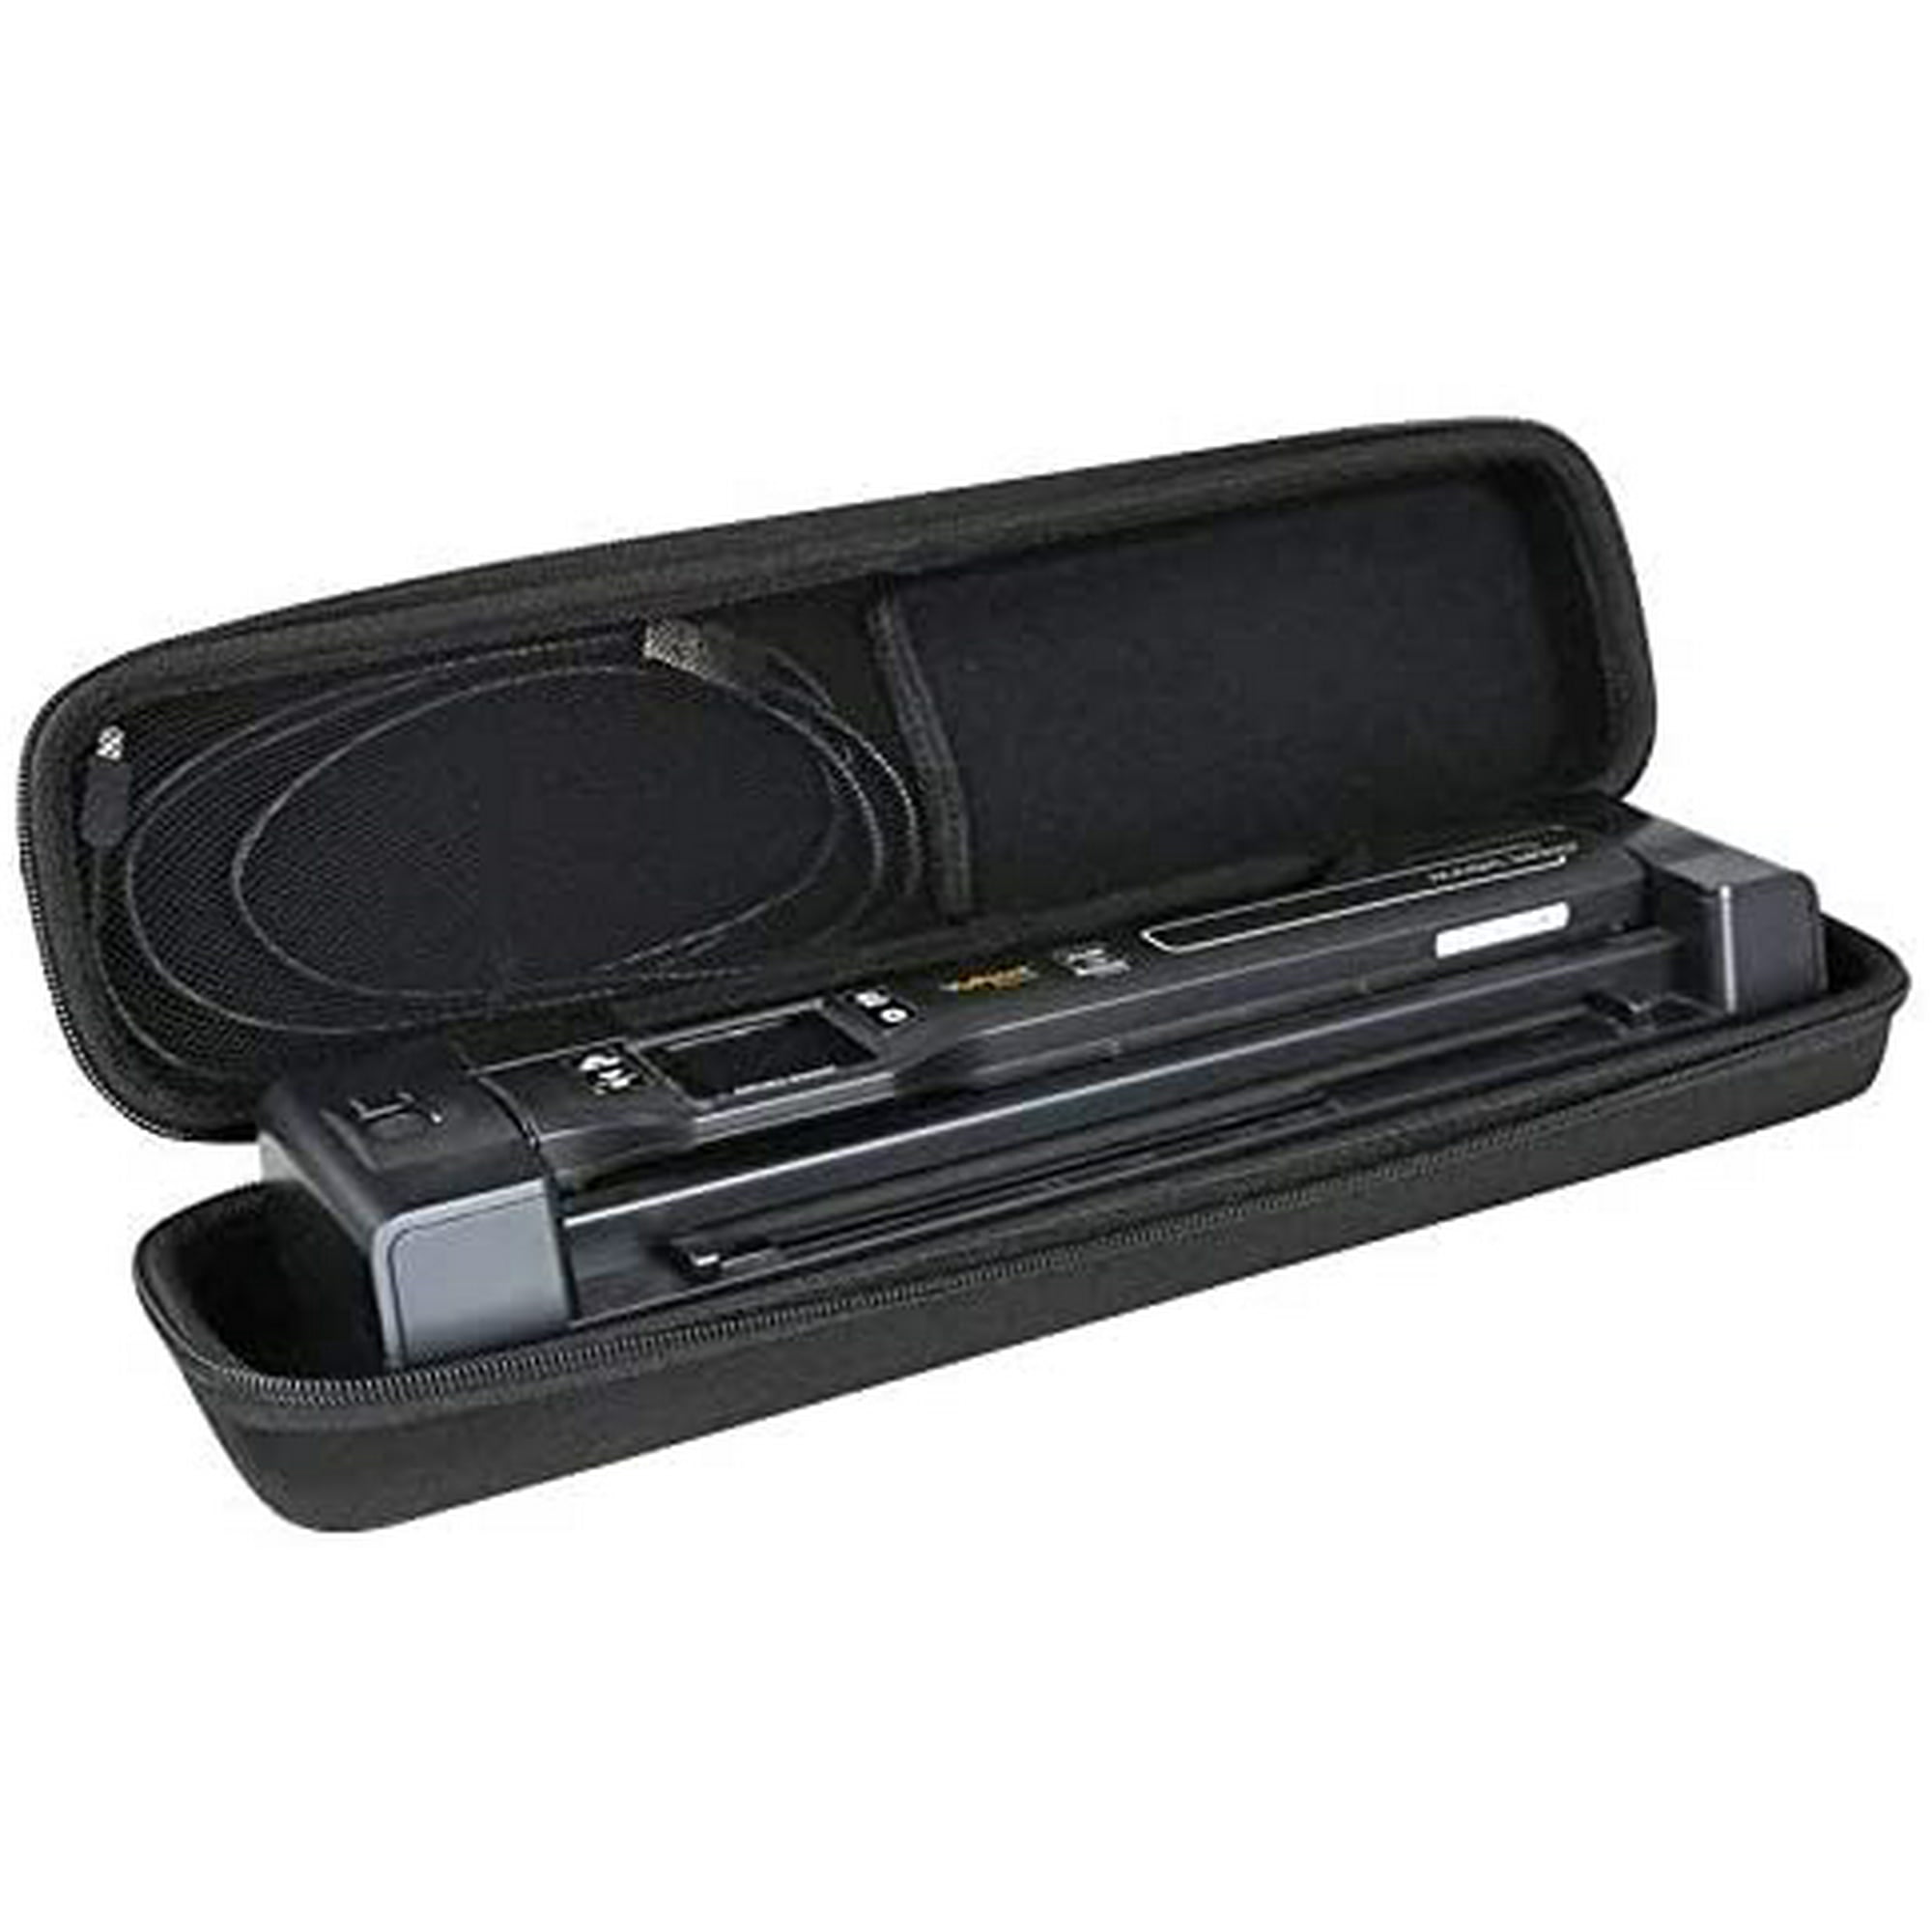 Plannu Hard Travel Case for Vupoint Solutions Magic Wand Portable Scanner  (PDSDK-ST470-VP) | Walmart Canada